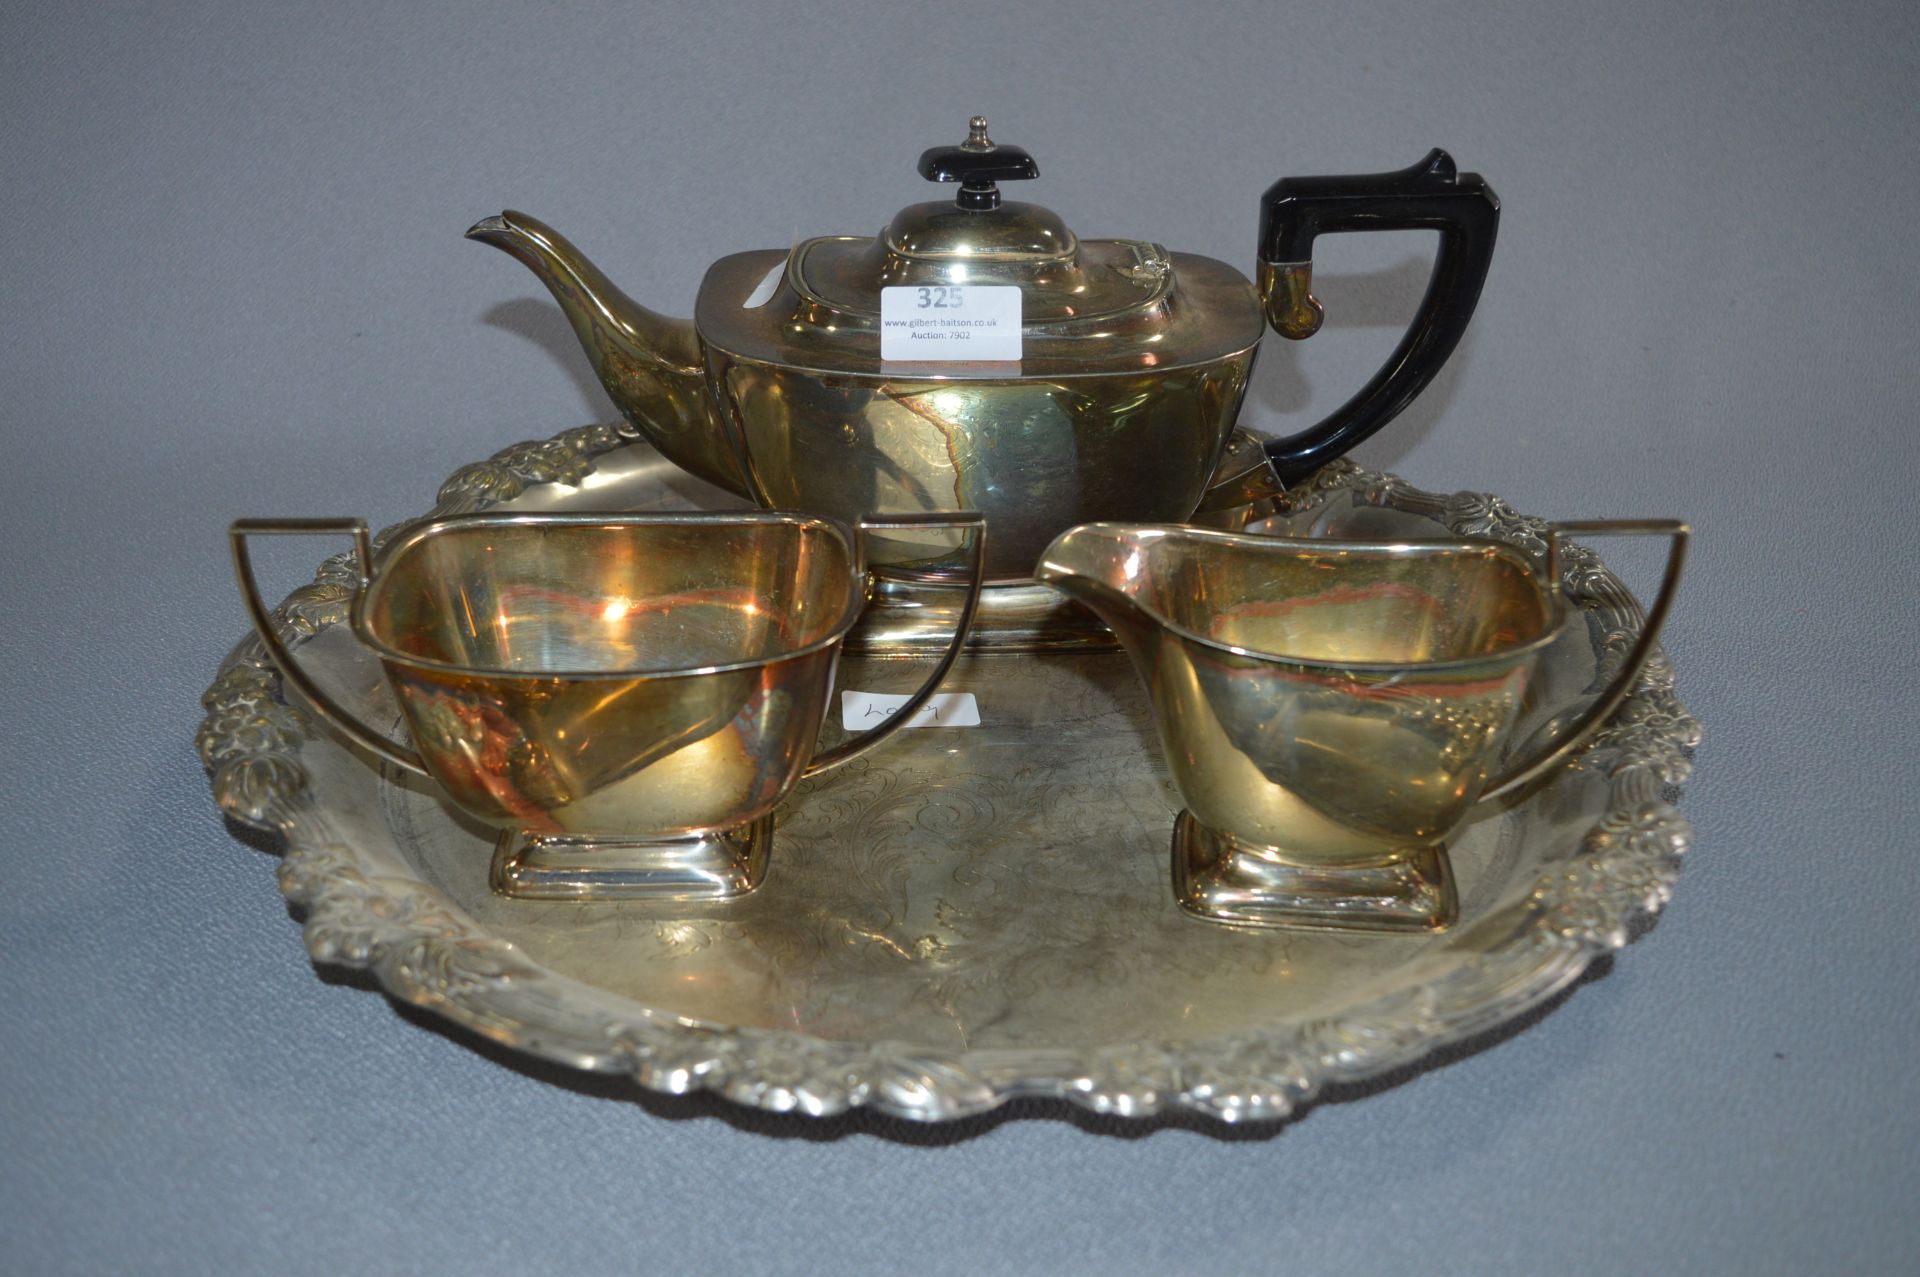 Three Piece Silver Plated Tea Set and a Tray